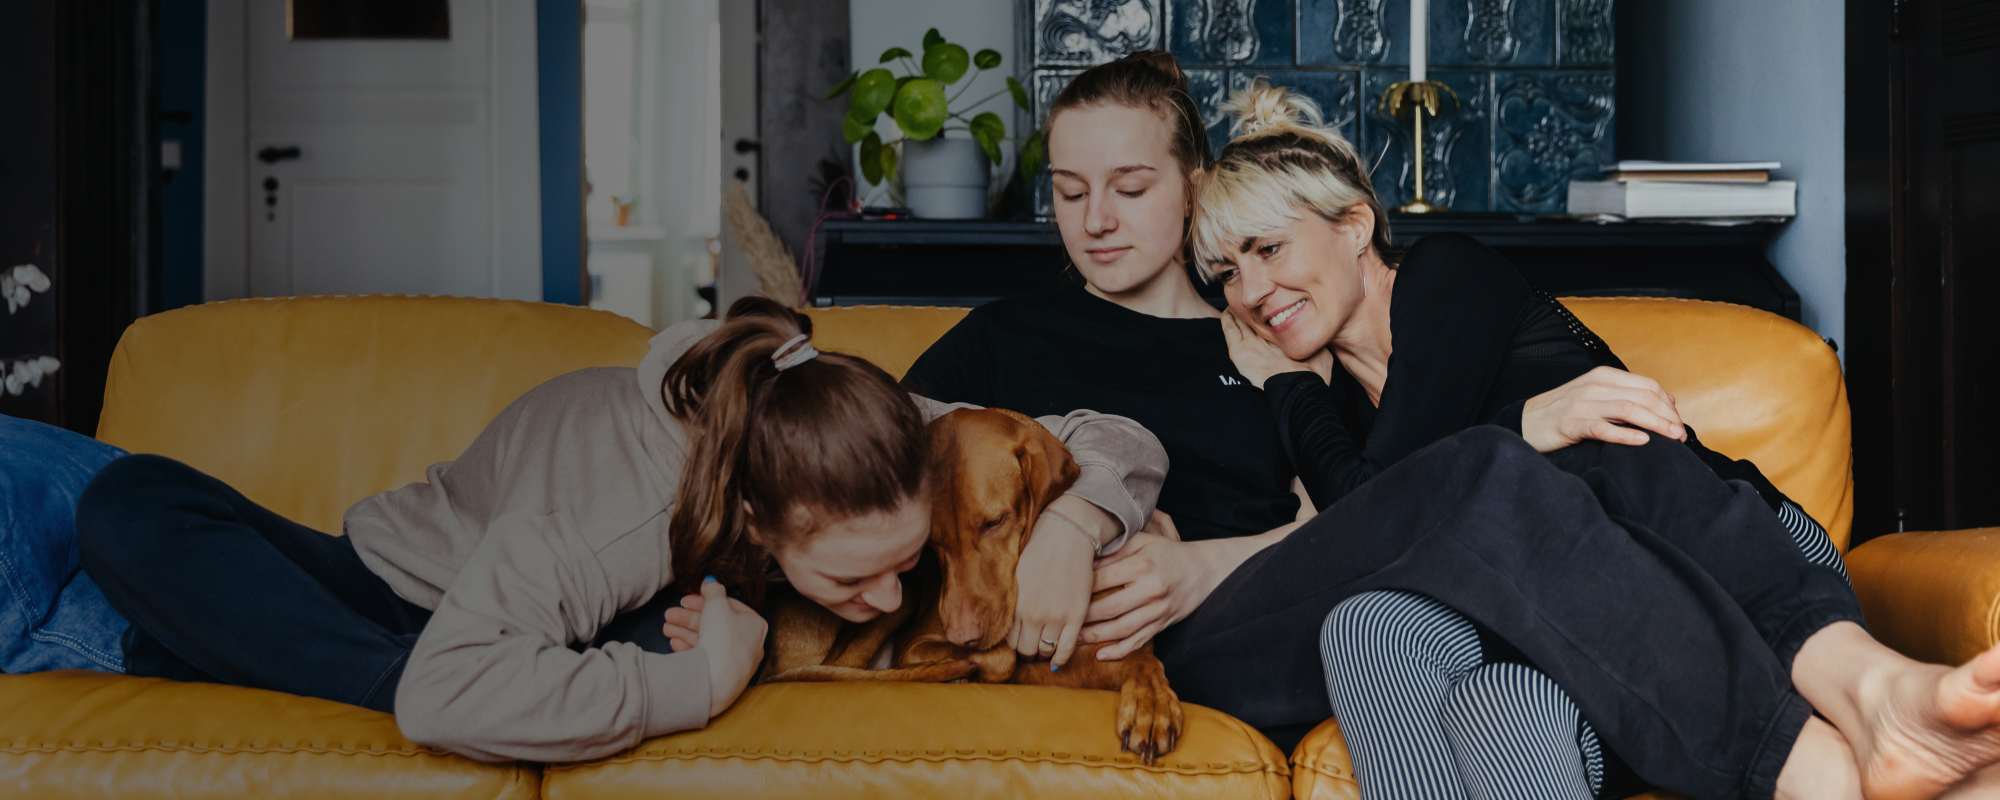 Family on sofa with dog